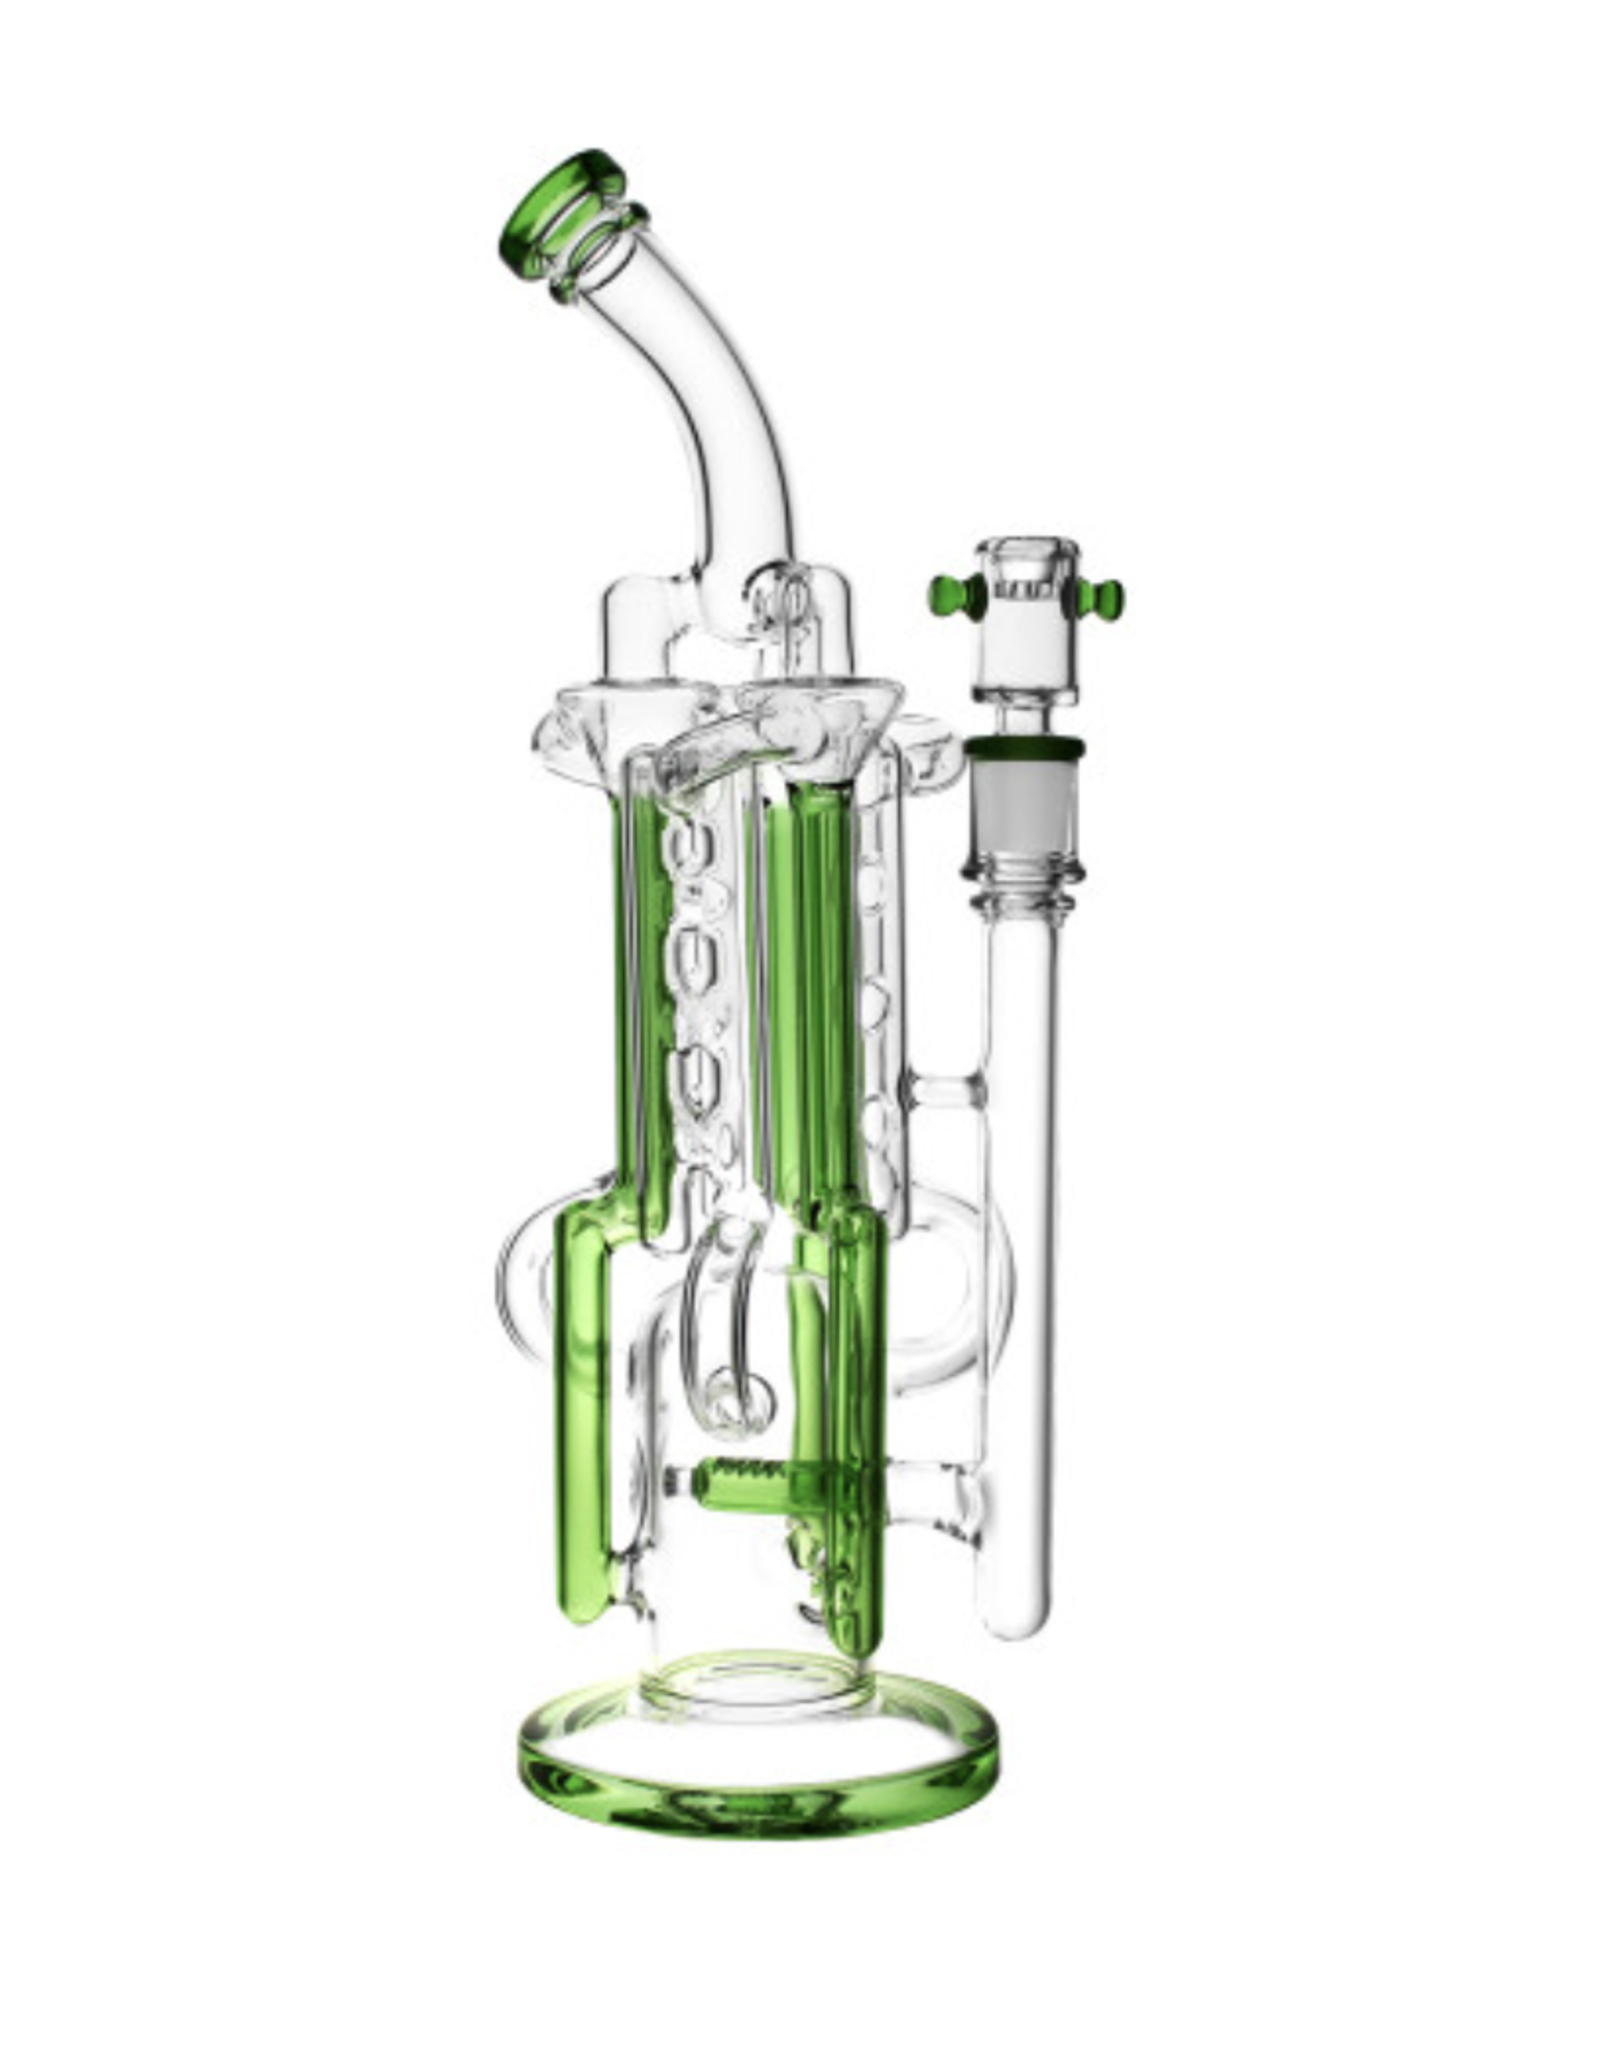 Pulsar 13" Space Station Recycler by Pulsar - Asst. Colours